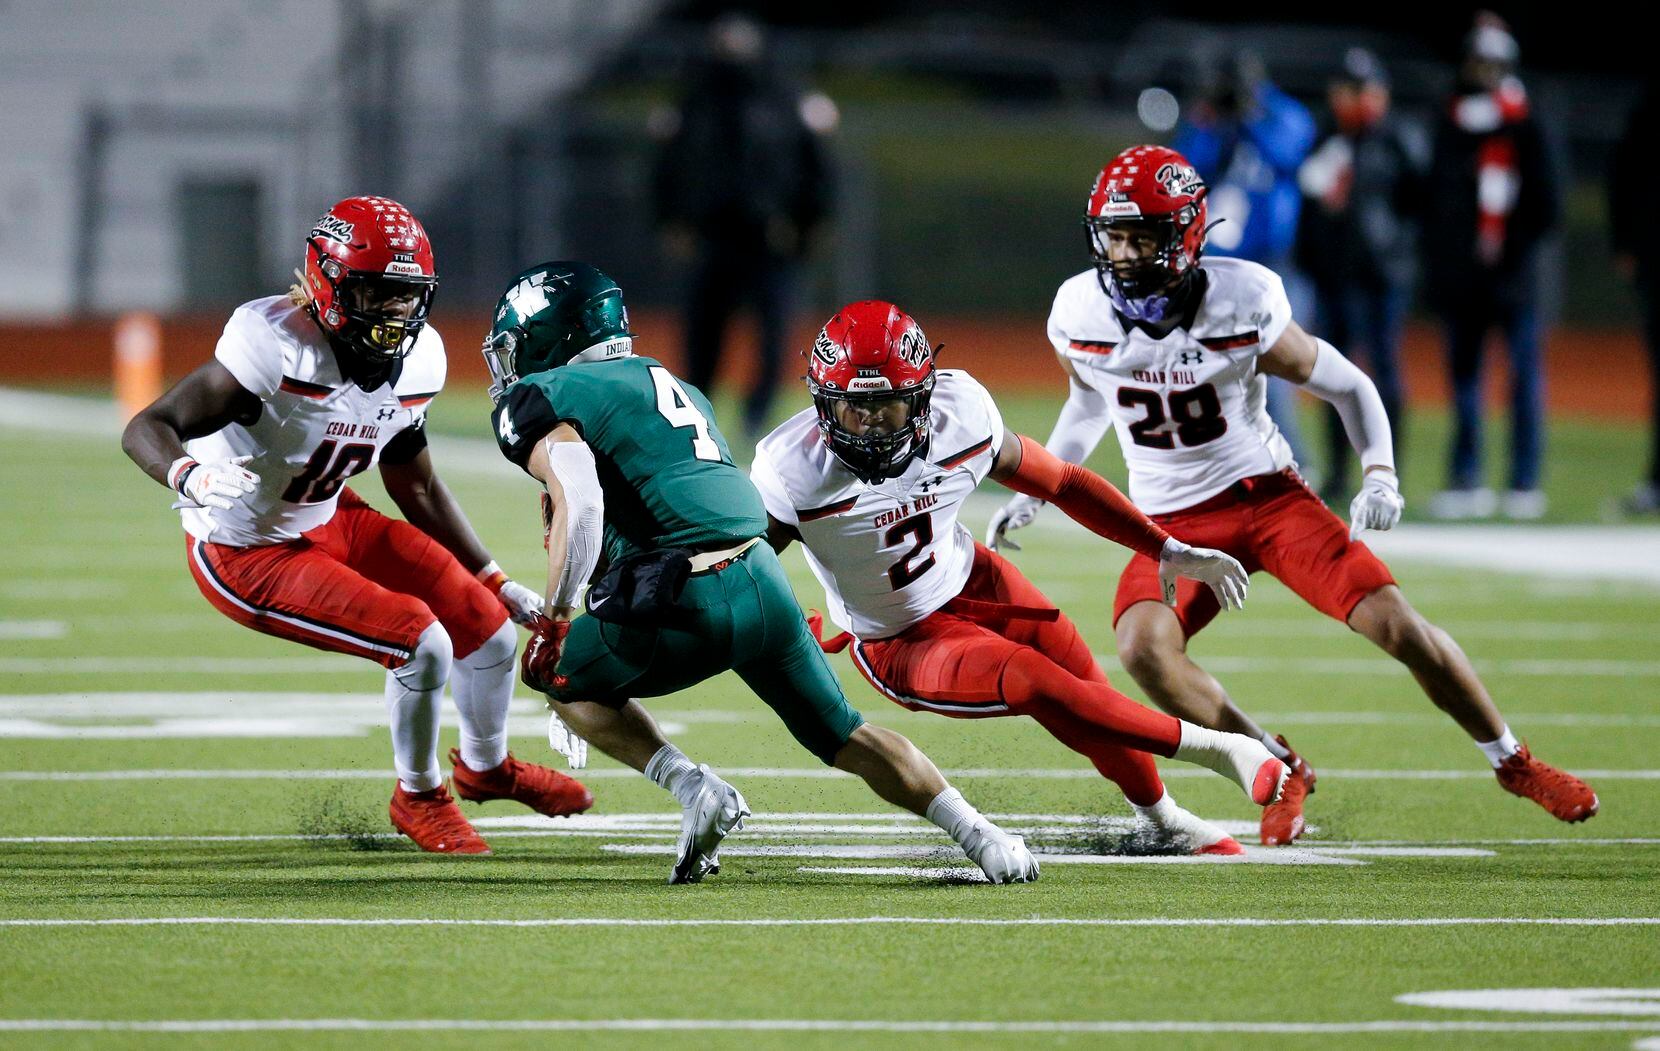 Waxahachie senior wide receiver Jaden Basham (4) looks for room against Cedar Hill senior middle linebacker Jaheim Lowe (10), senior safety Kendall Stevens (2) and junior cornerback Jalon Peoples (28) during the first half of a high school football game in Waxahachie, Friday, October 30, 2020. (Brandon Wade/Special Contributor)